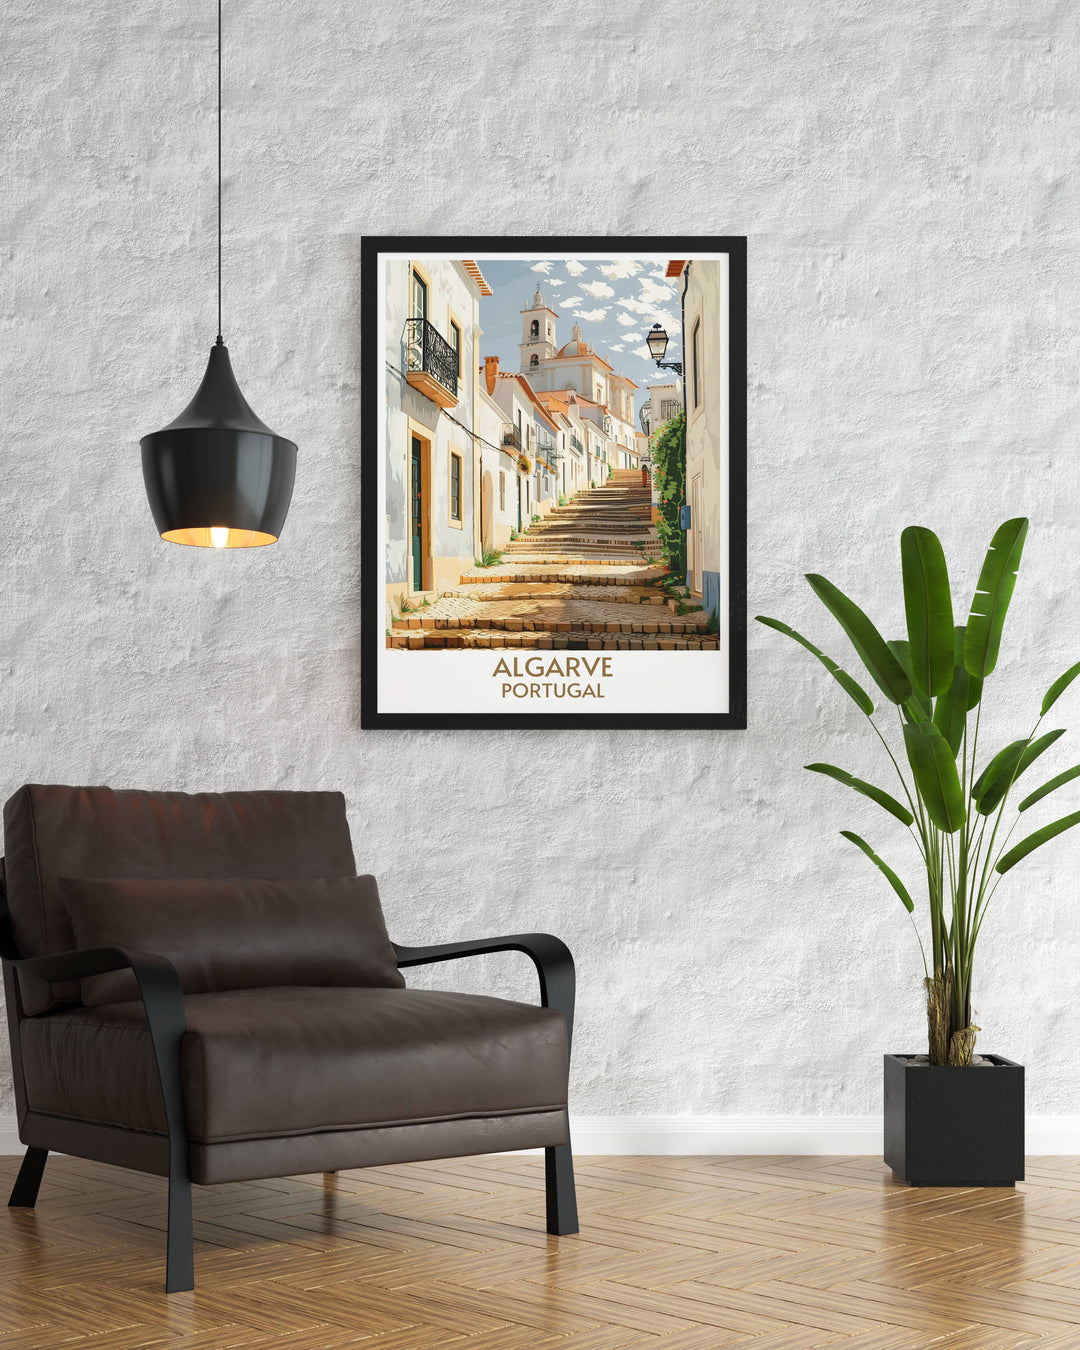 Faro old town matted art print highlighting the beautiful architecture and vibrant culture of this Algarve icon. Ideal for enhancing your home decor with a touch of historic elegance or as a special gift.